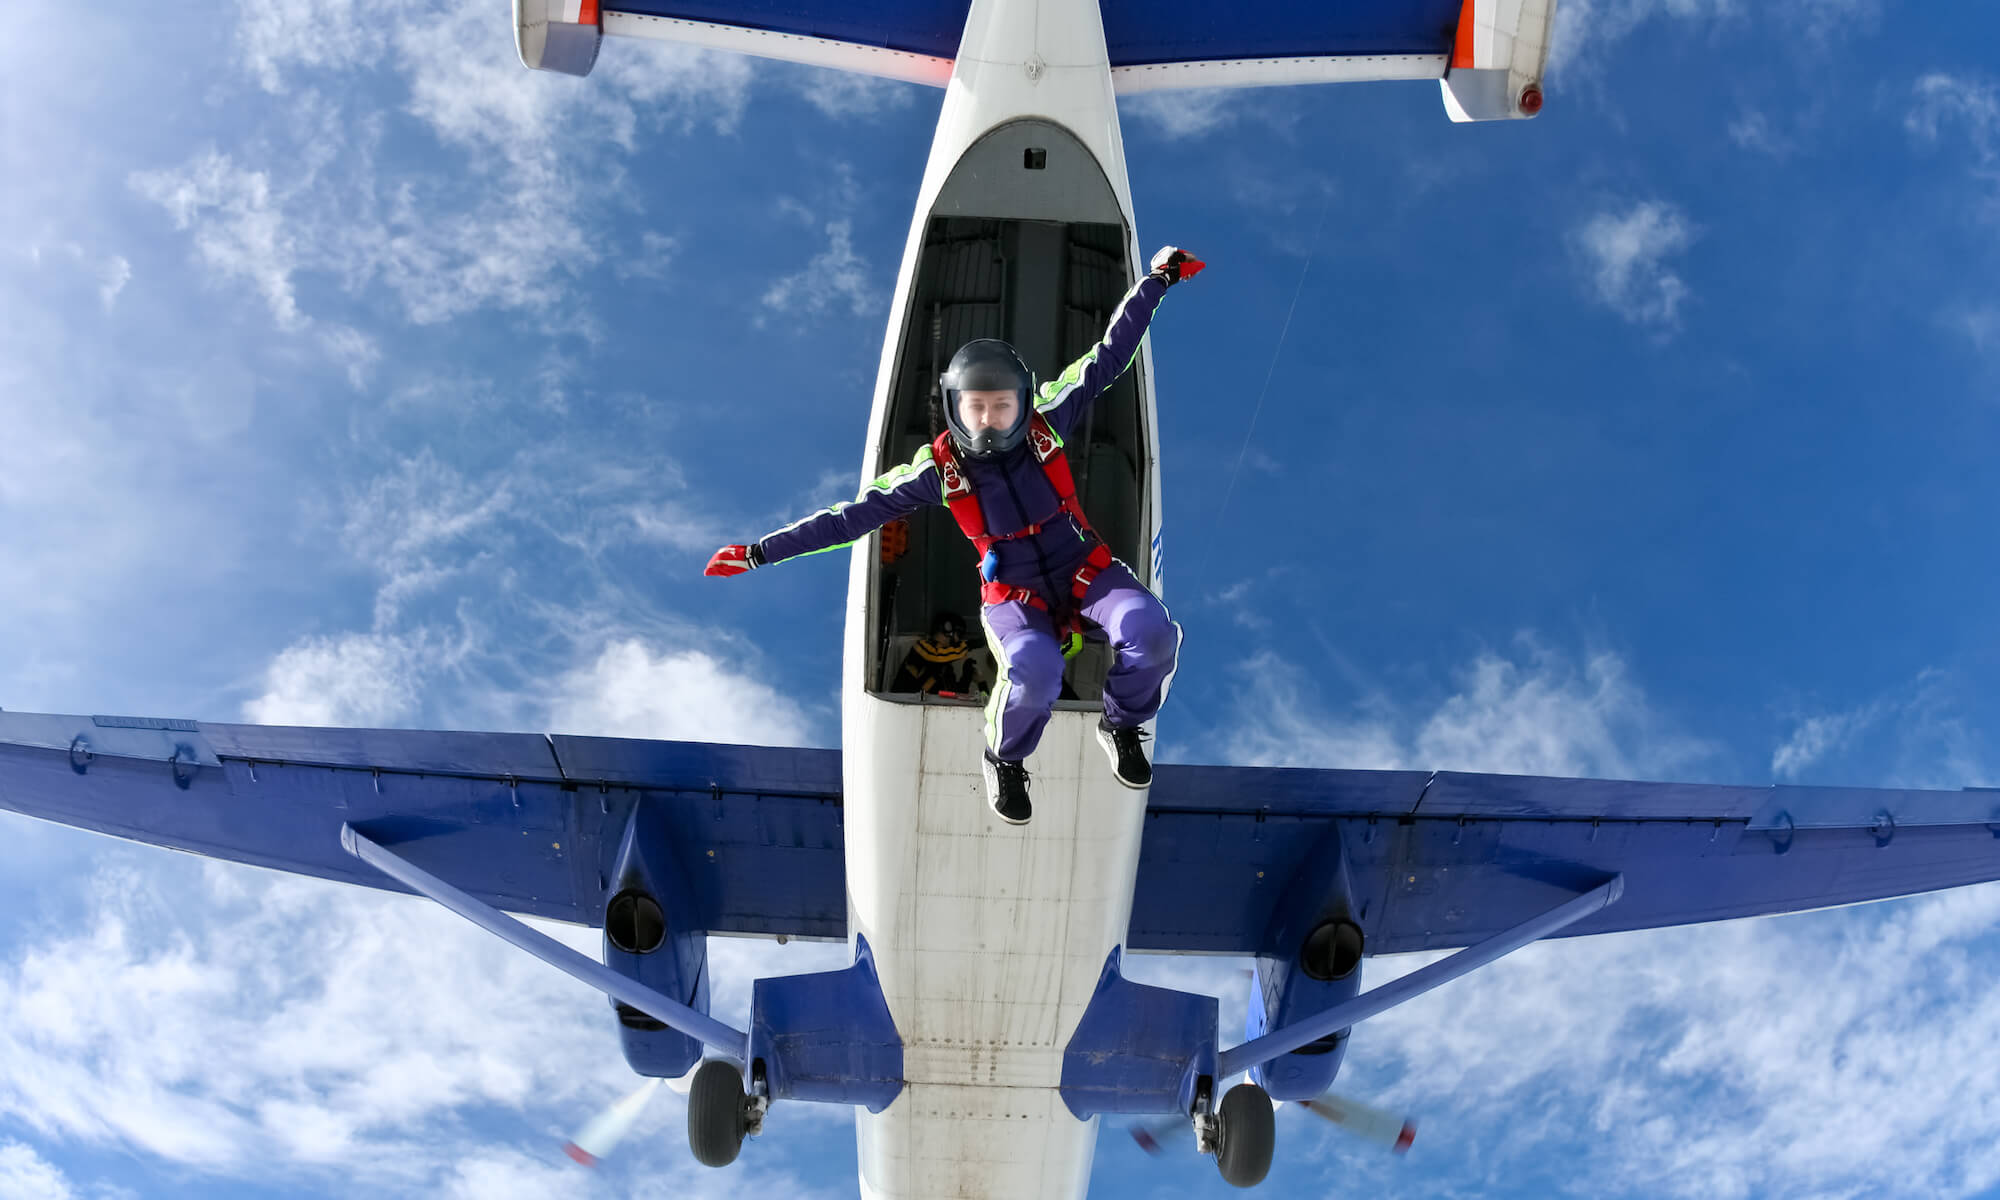 Skydiver jumping from plane